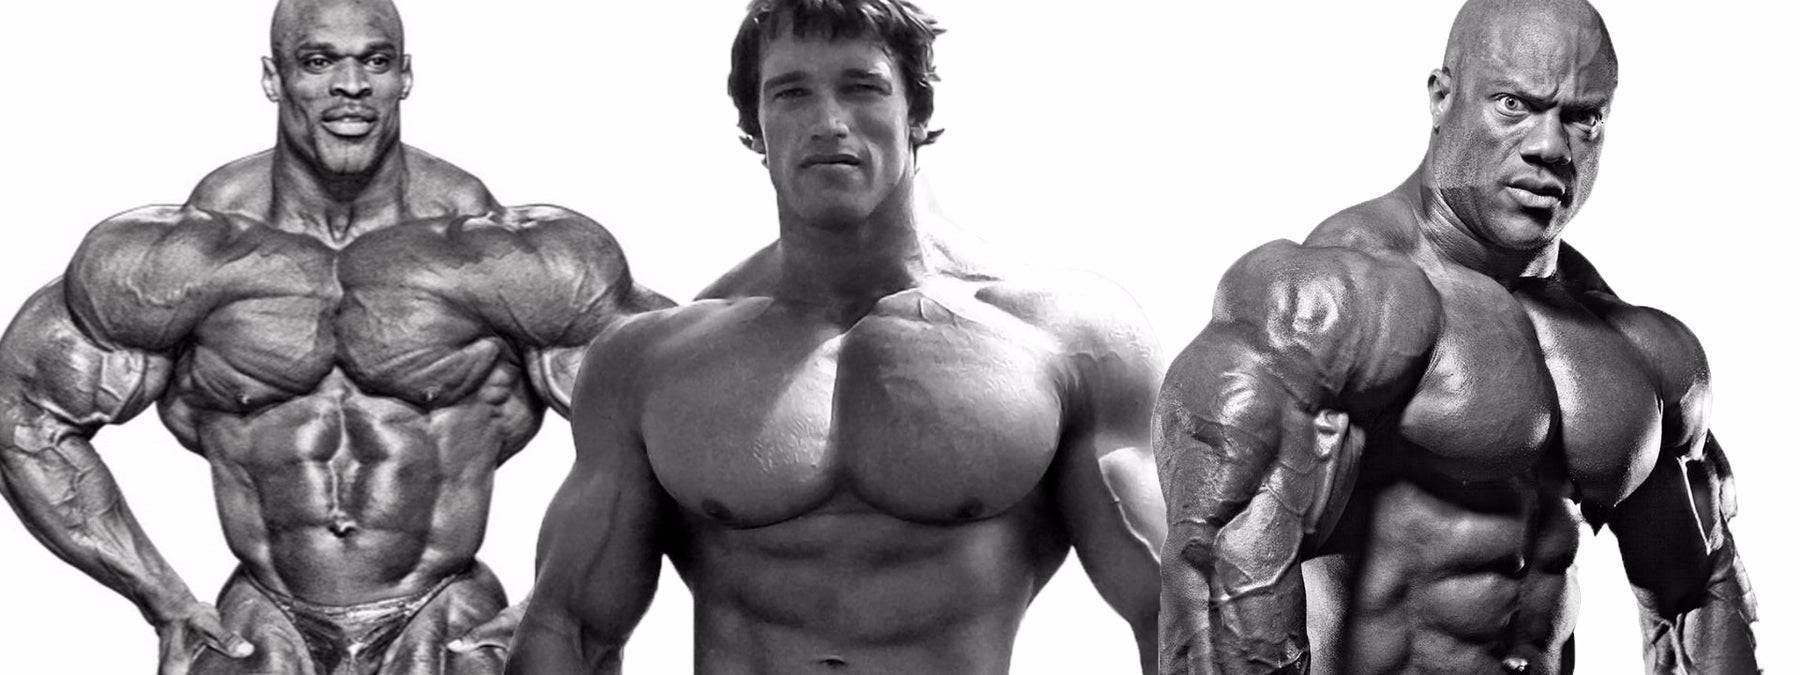 Top 10 Bodybuilders of All-Time